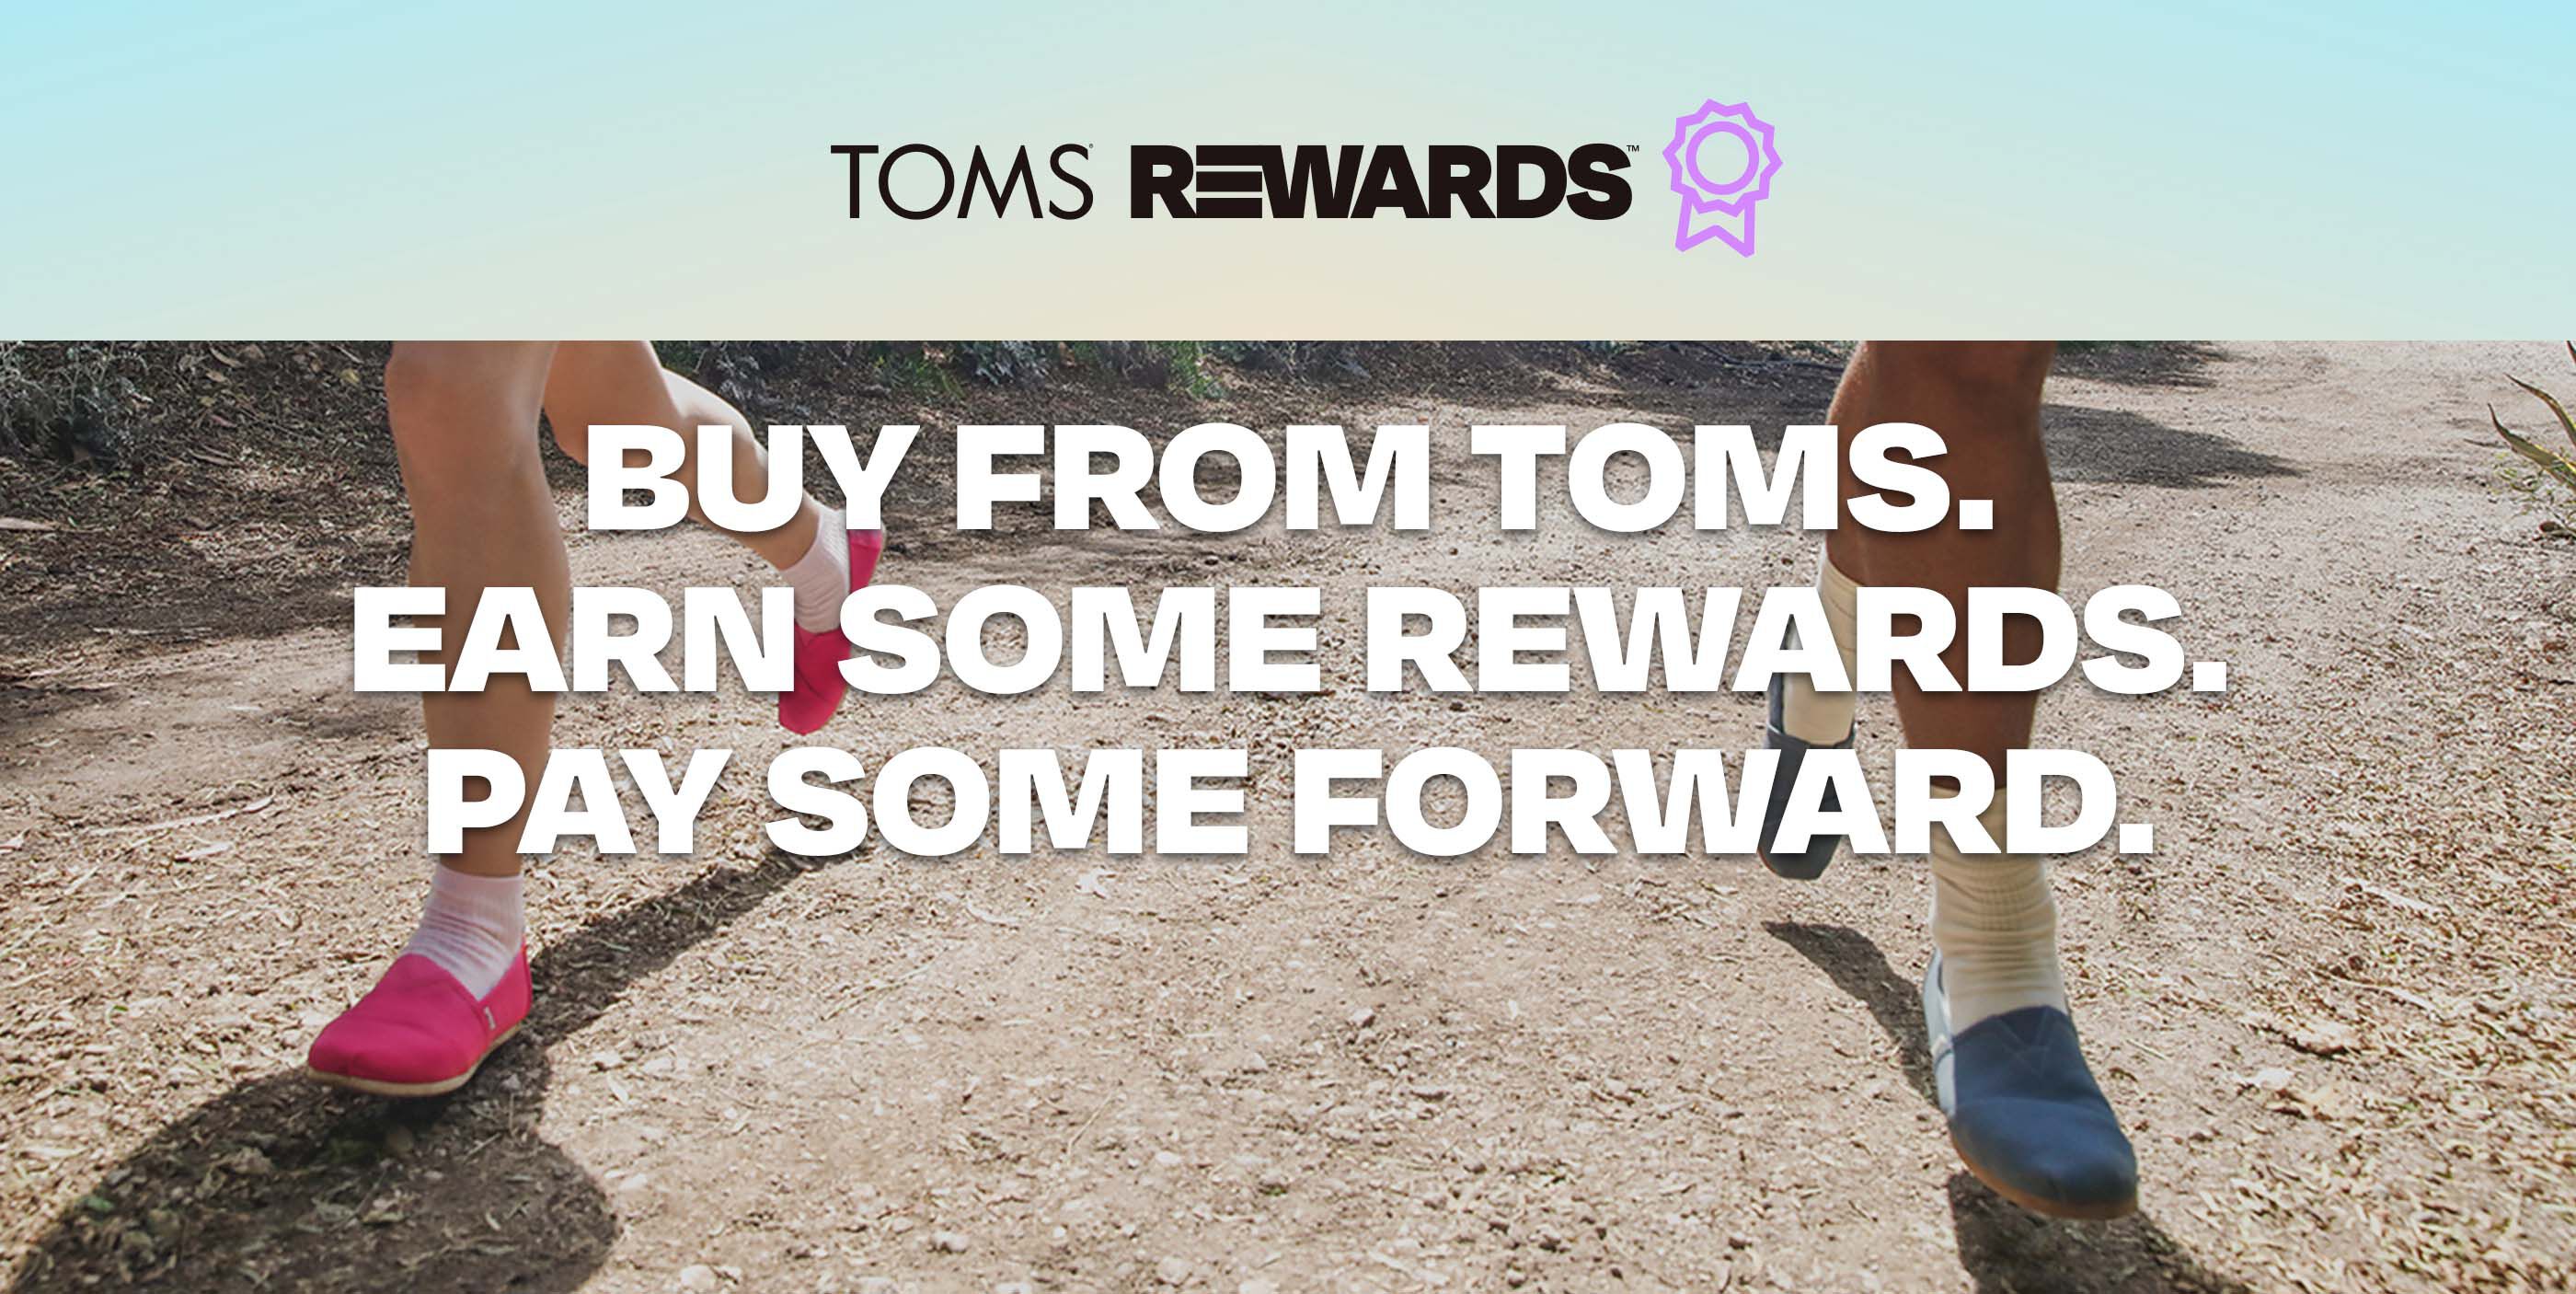 TOMS REWARDS. Buy from TOMS. Earn some rewards. Pay some forward. Models wearing TOMS Alpargatas running on sand.